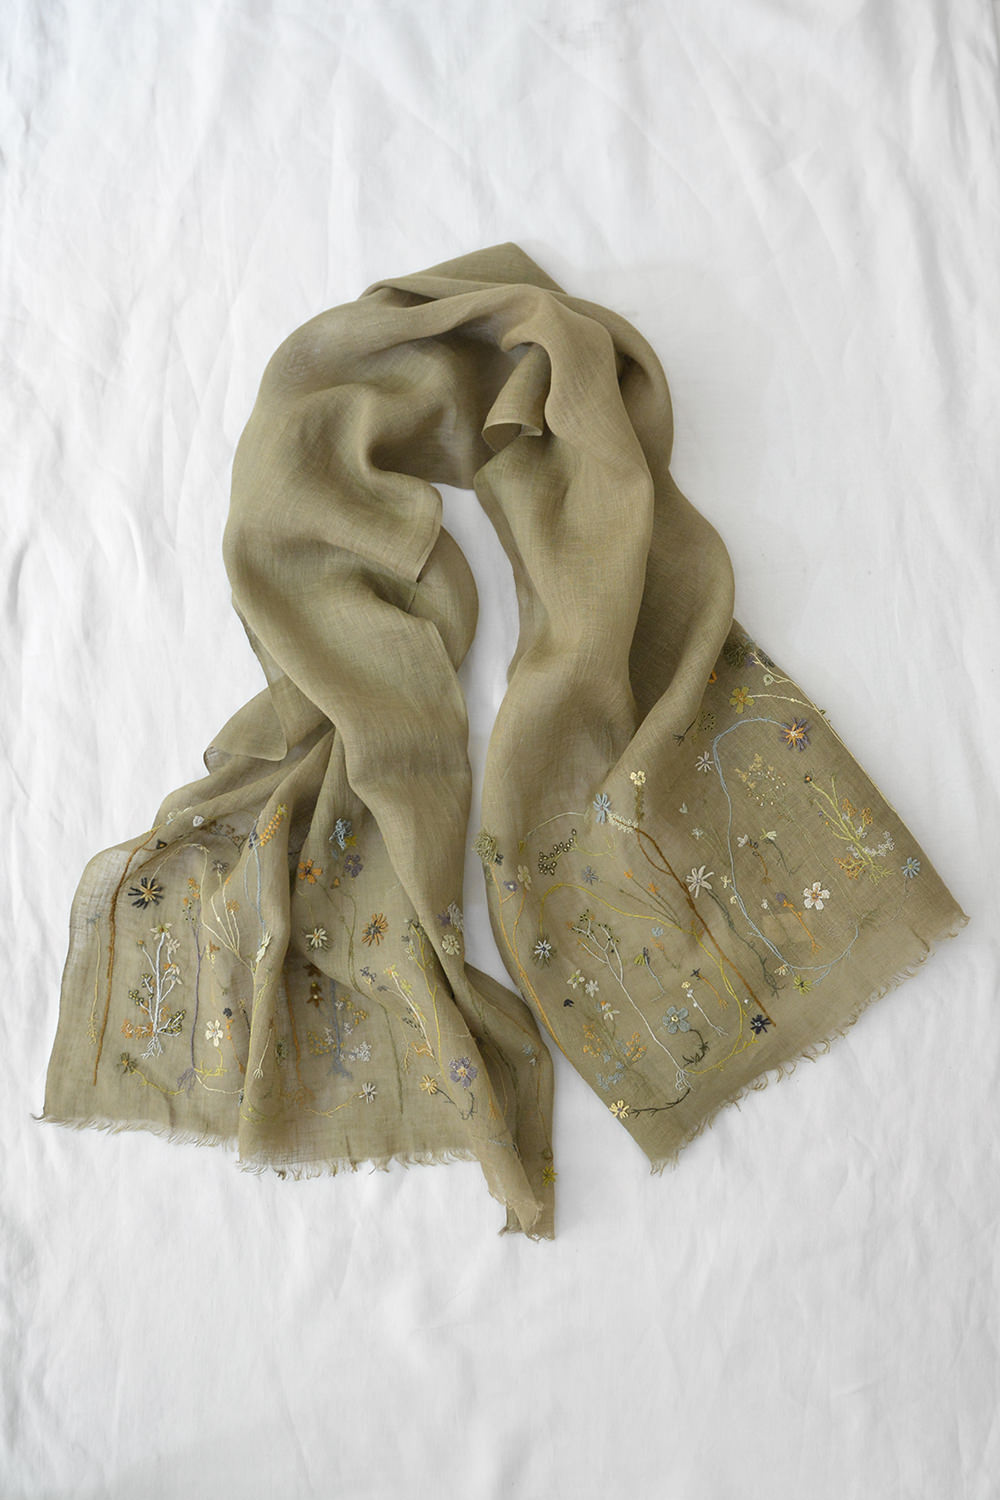 Sophie Digard Linen Stole - Thyme Wildflower. Makie main.